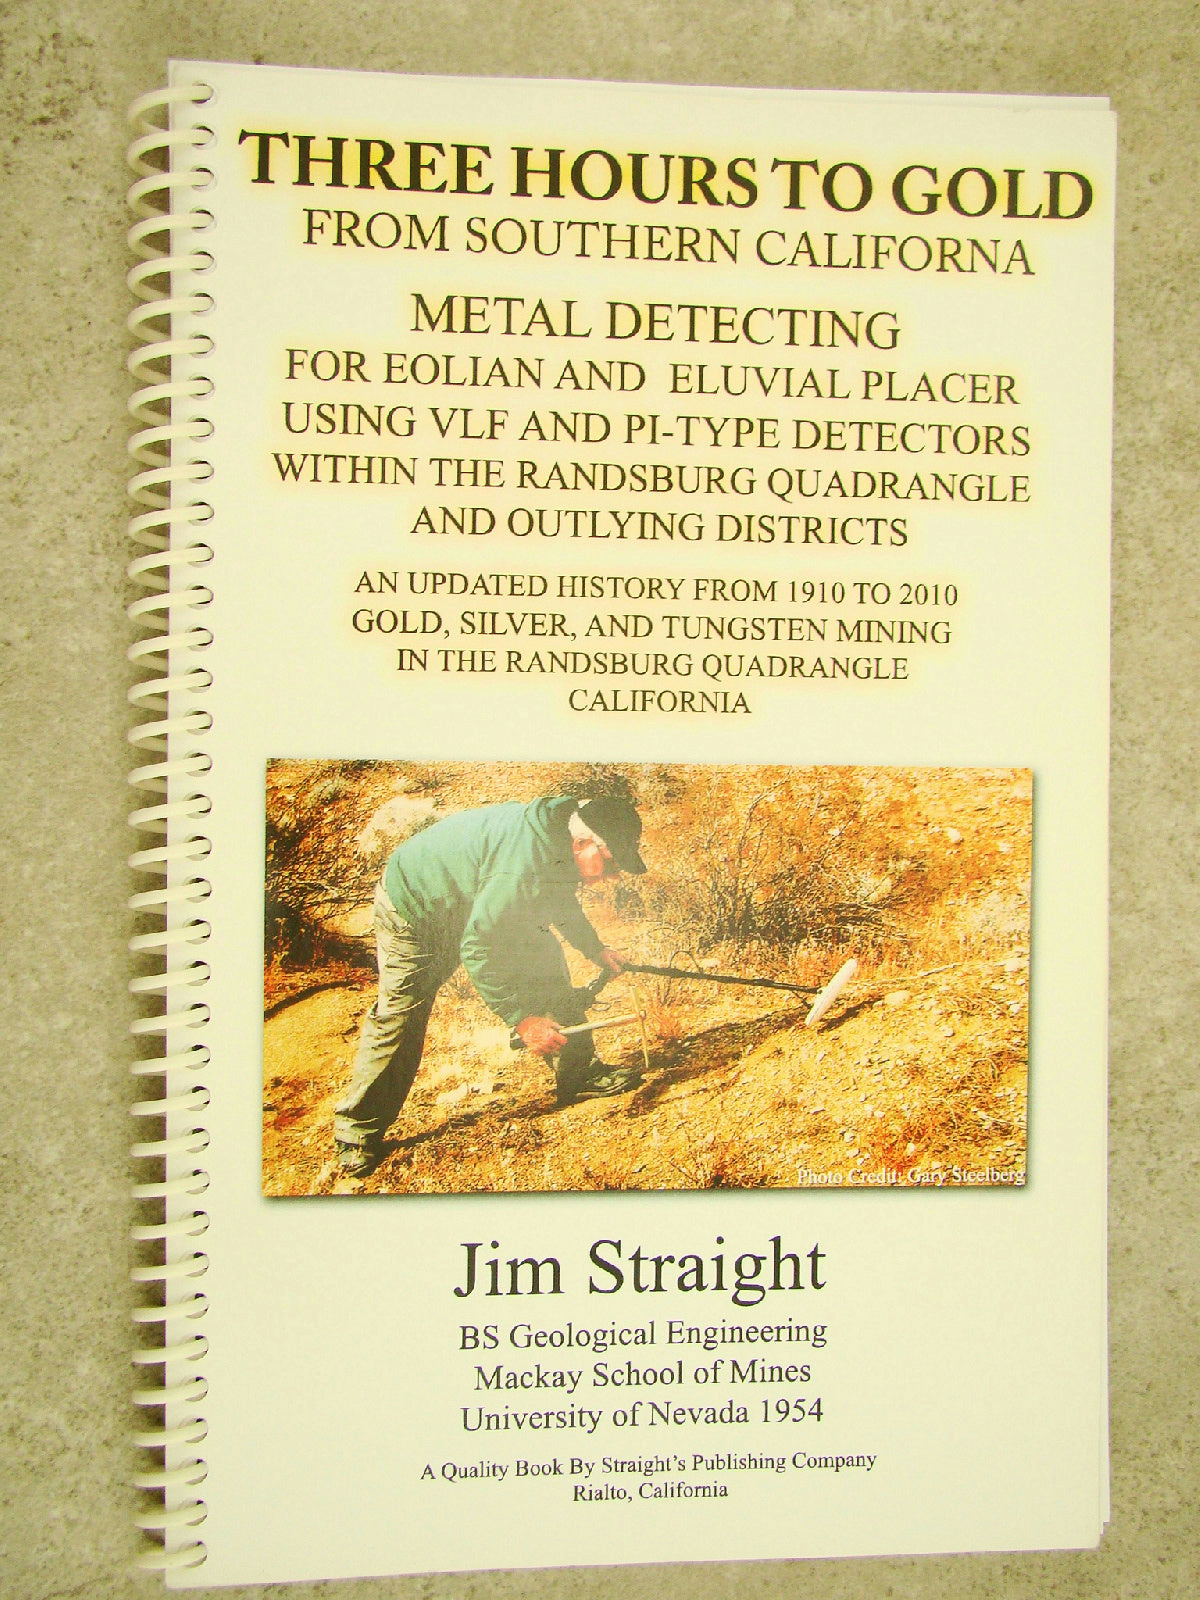 Three Hours to Gold From Southern California By Jim Stright Signed Copy